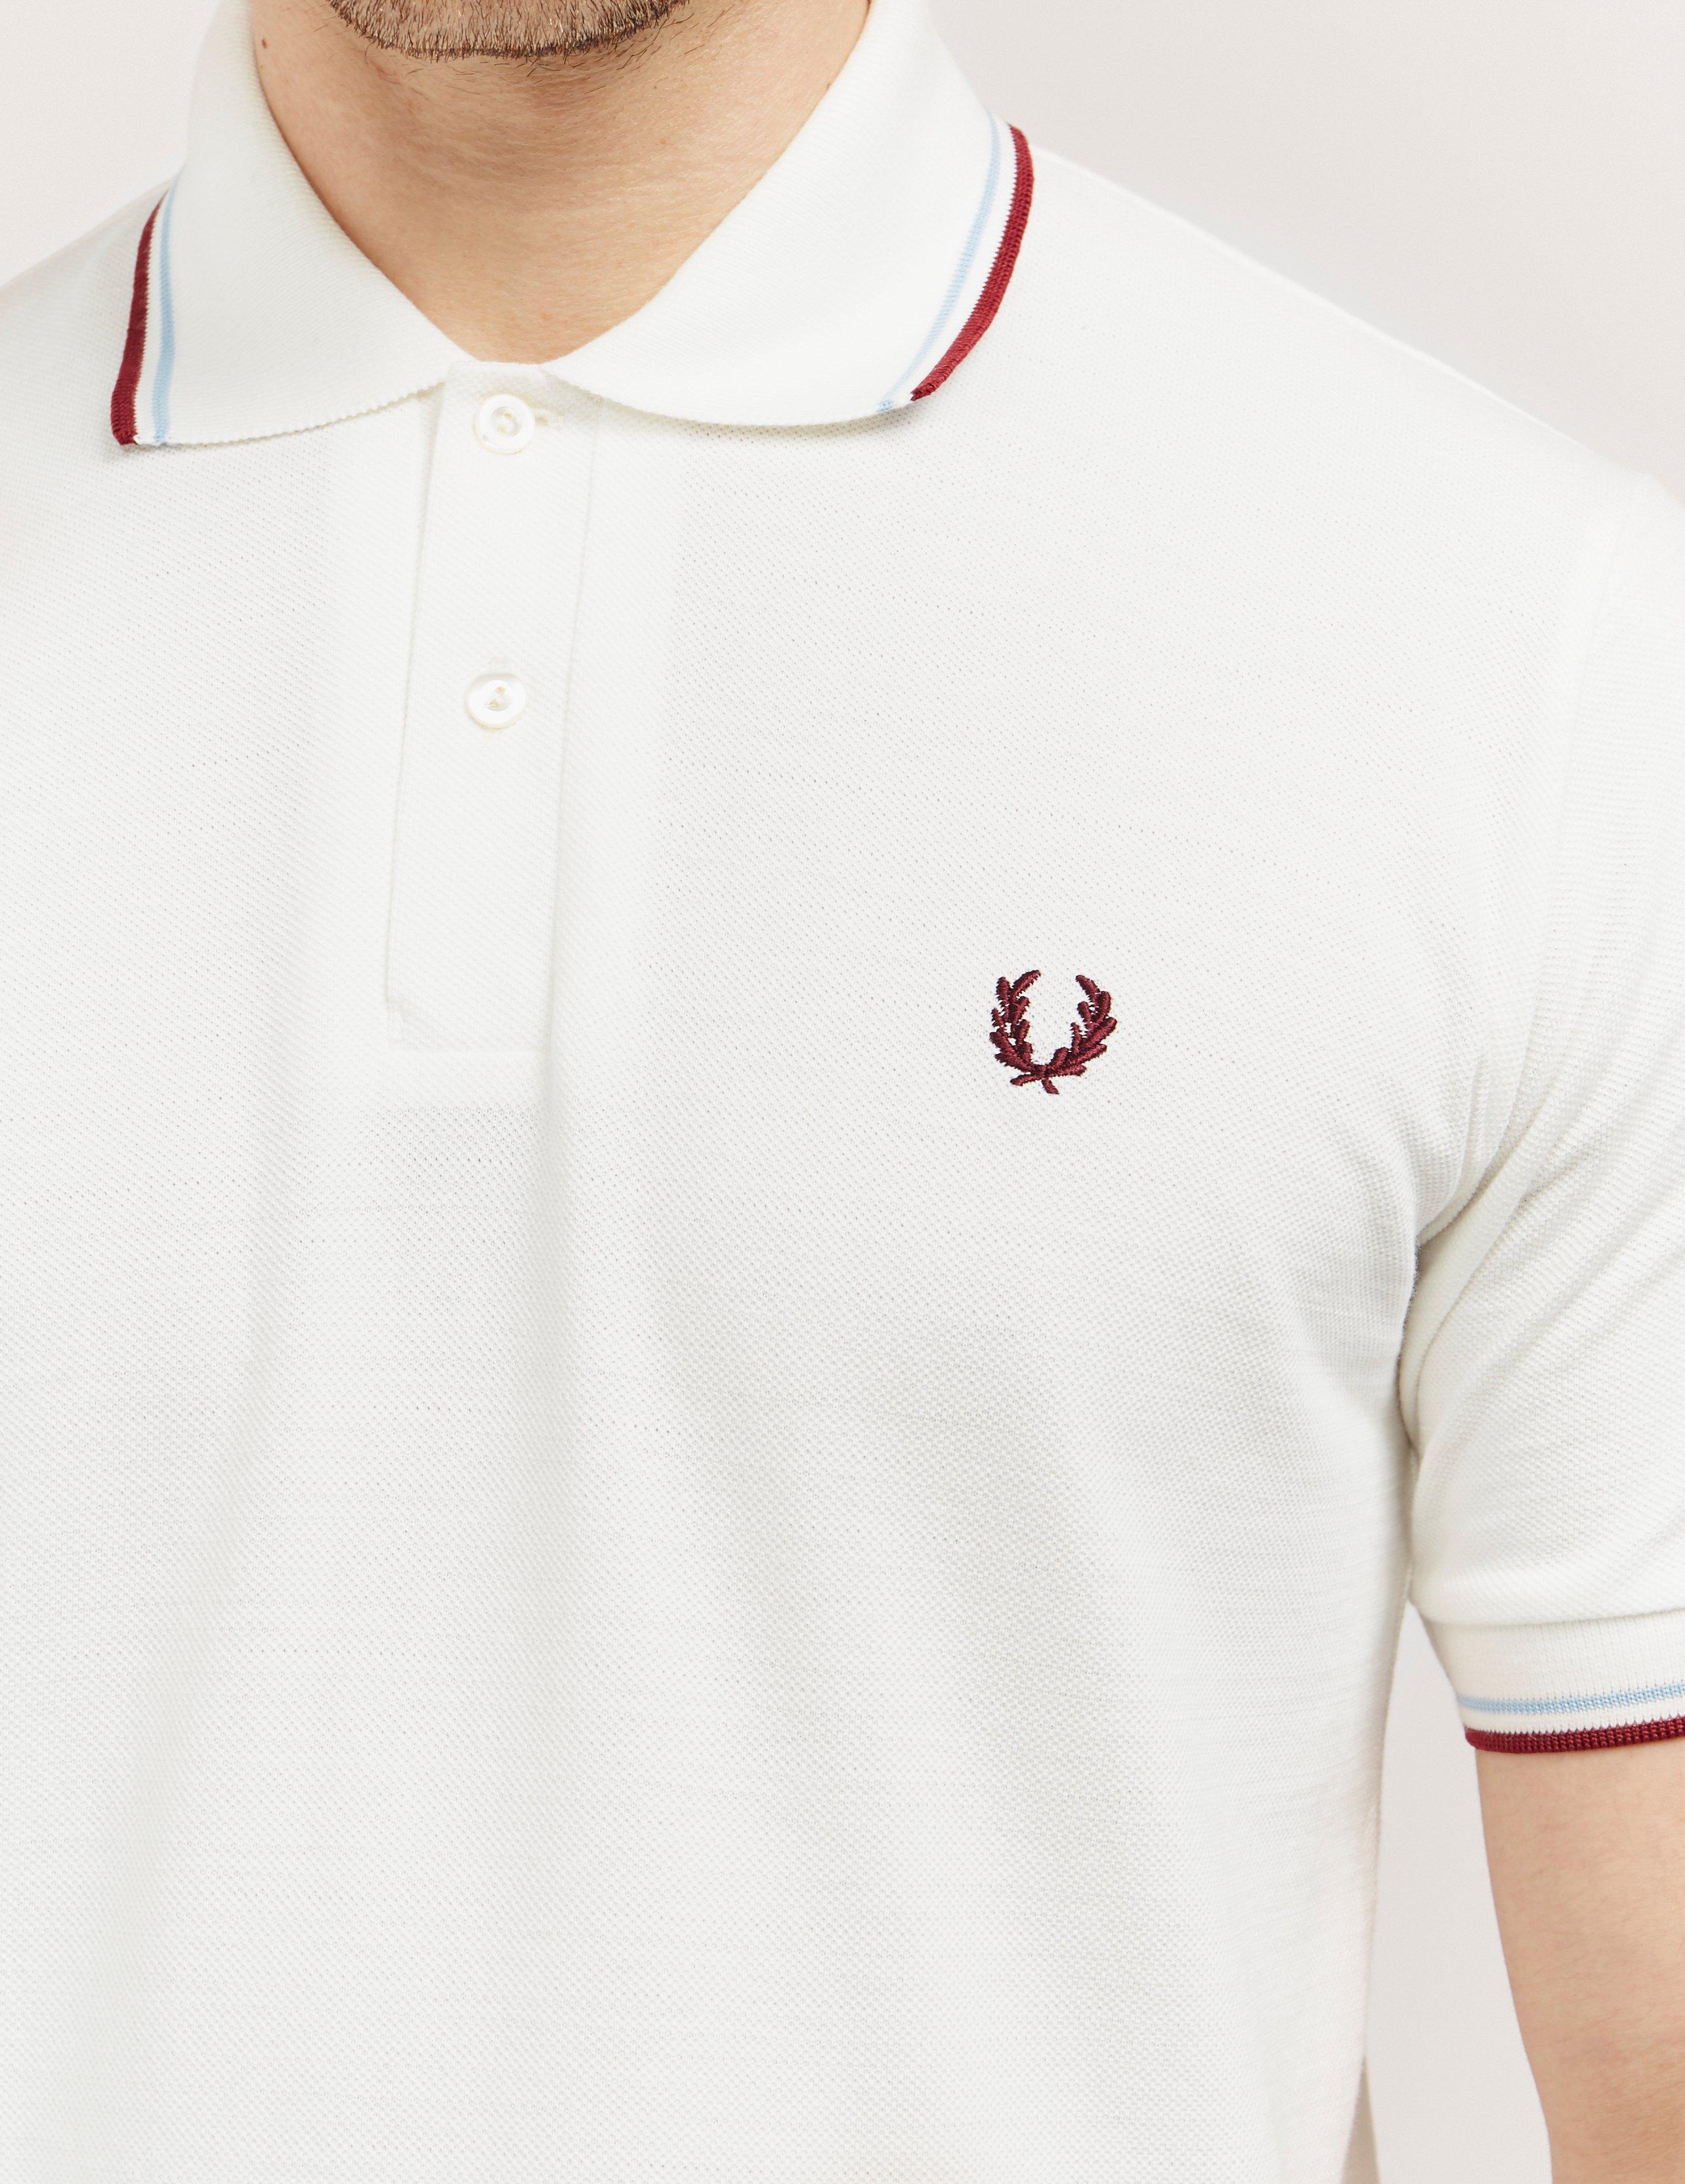 Fred Perry Cotton Made In England Tipped Polo Shirt in White for Men - Lyst